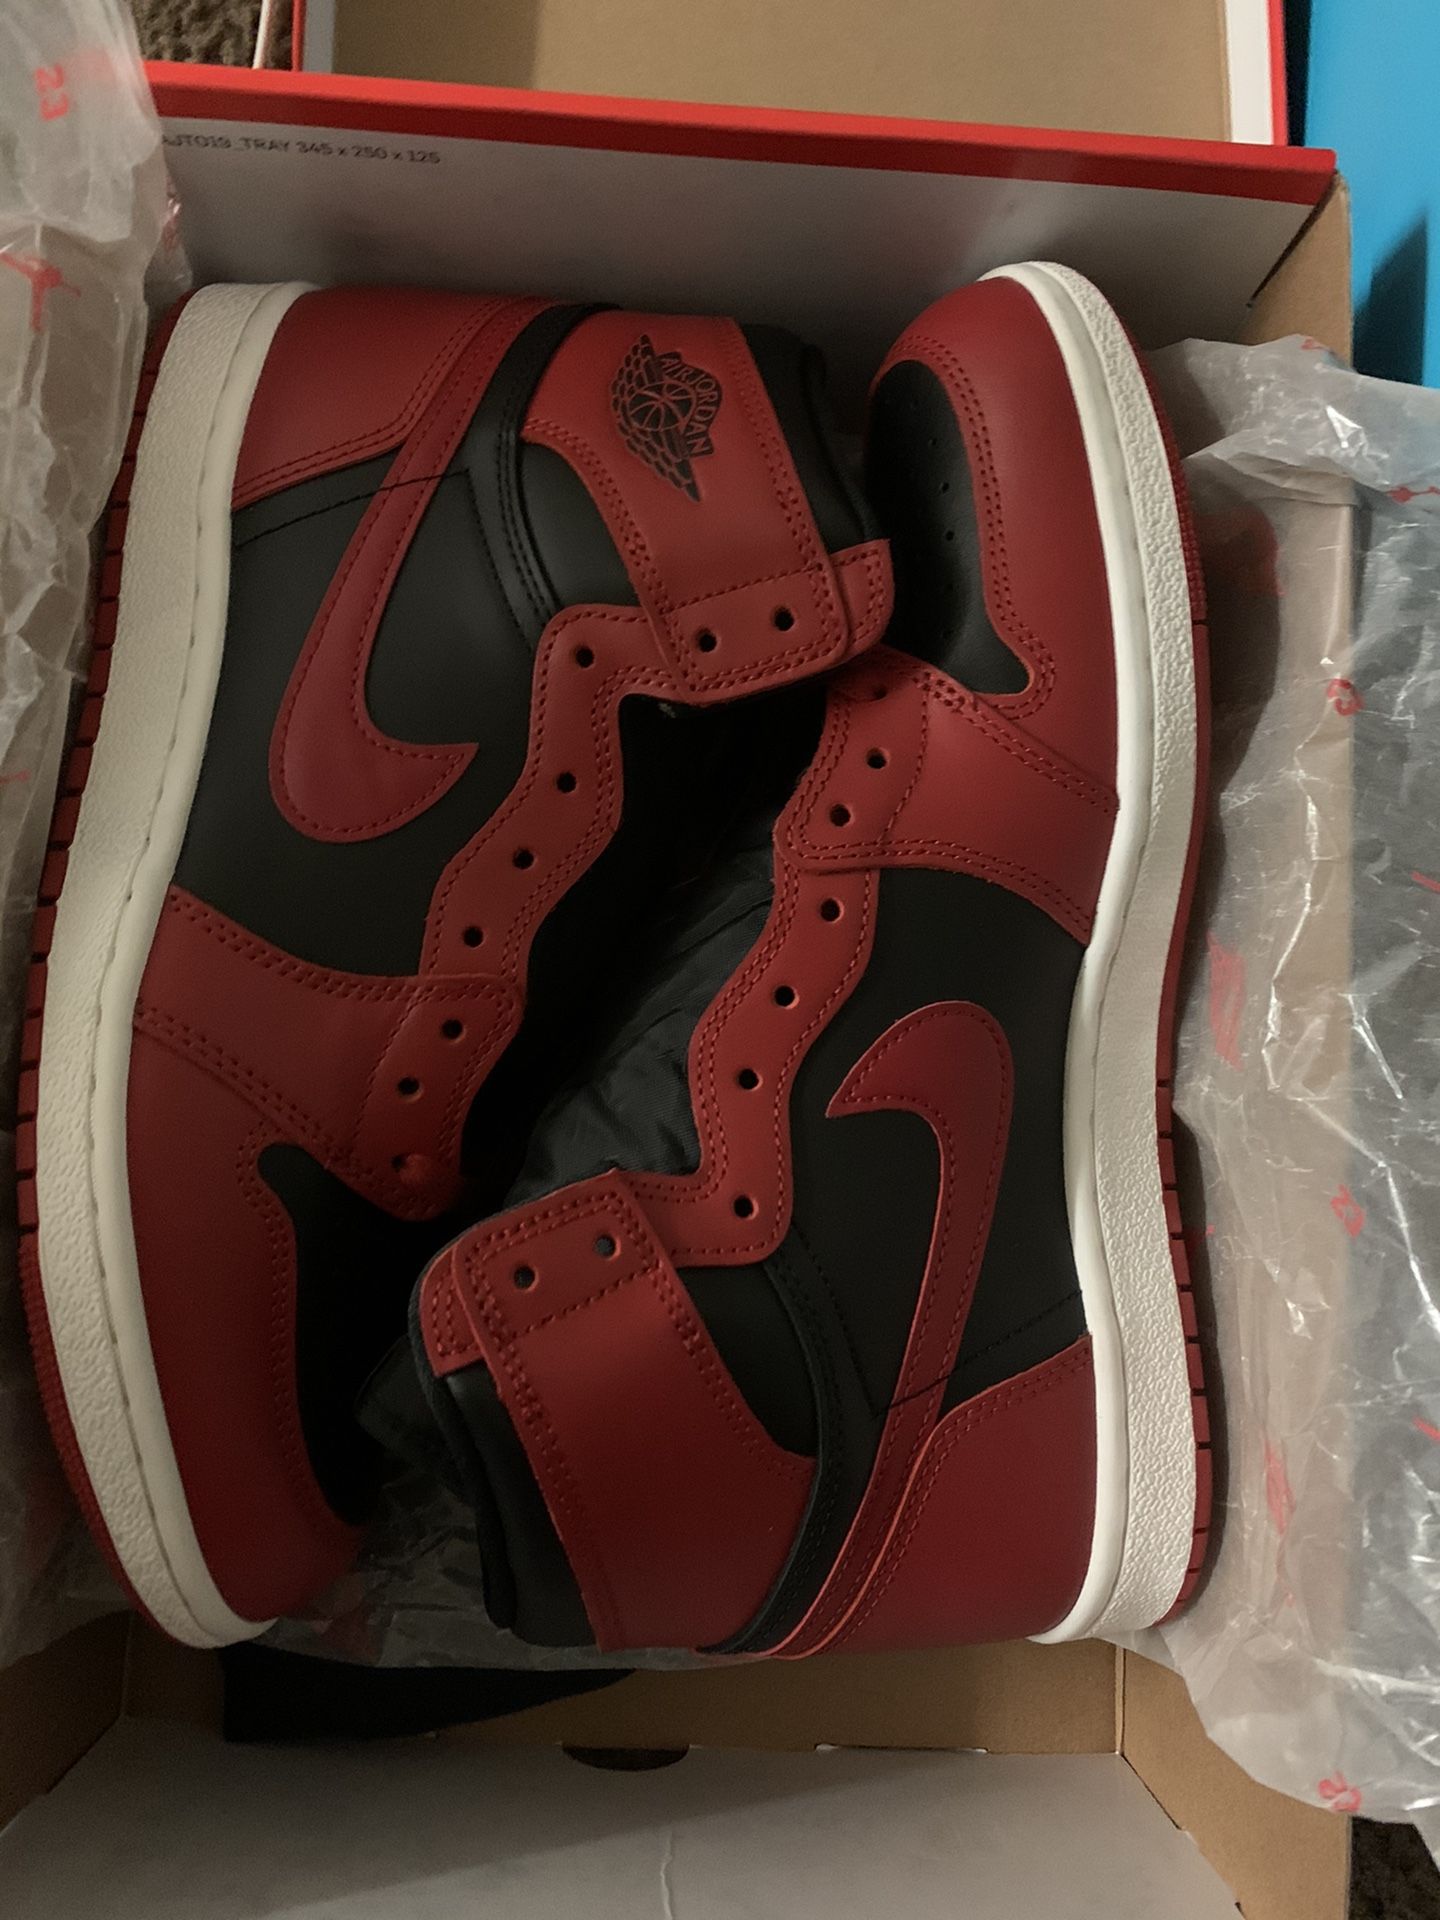 Jordan 1 high 85 bred 600$ size 11 DS 100% authentic